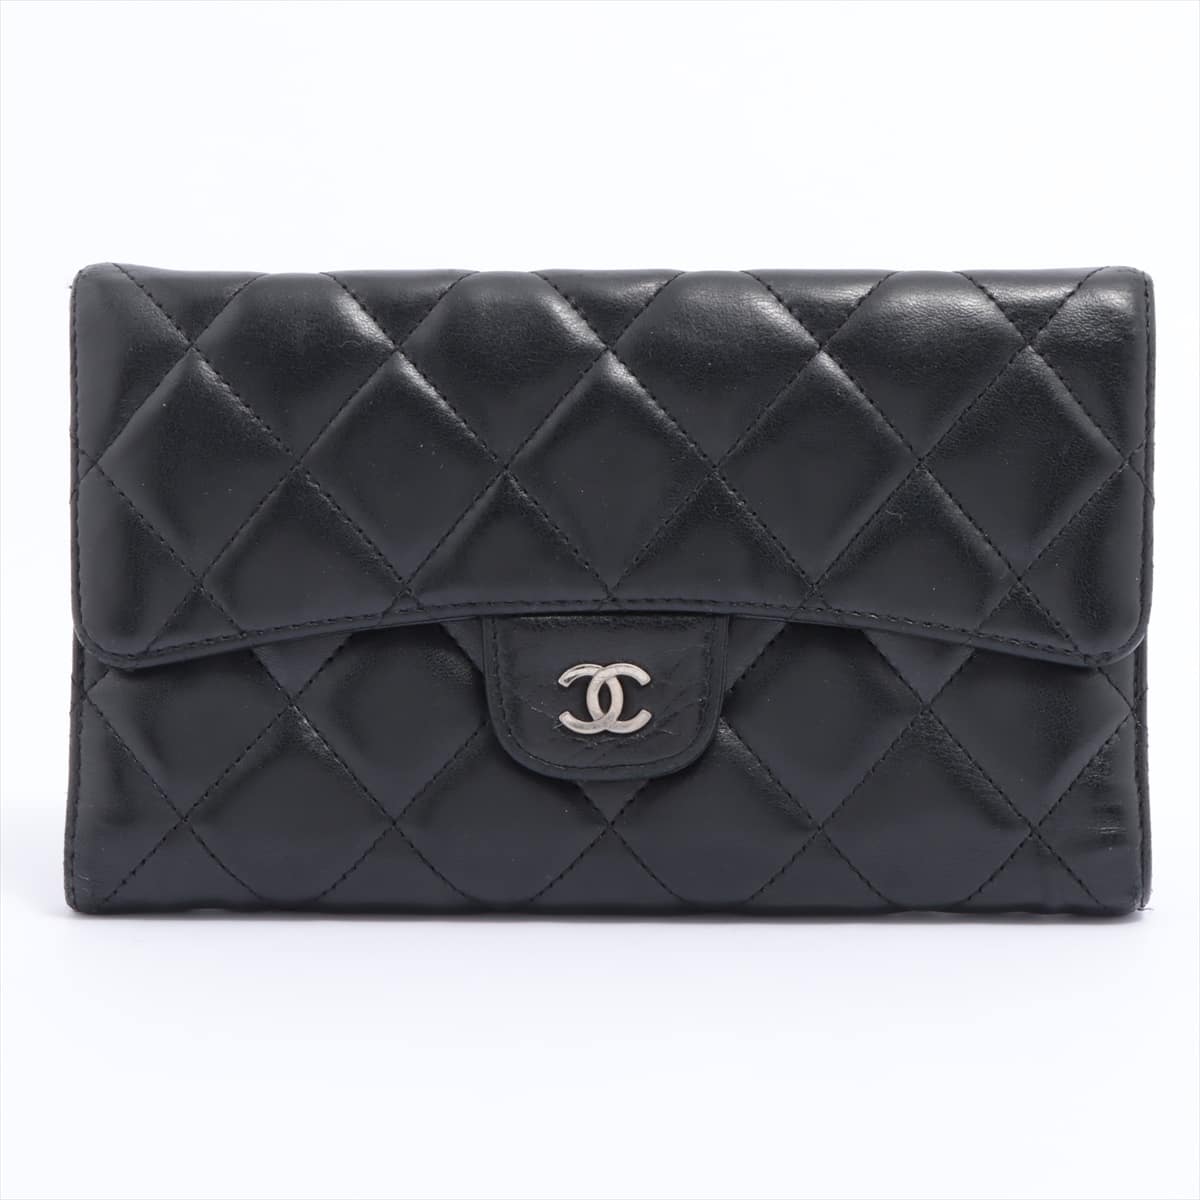 Chanel Matelasse Leather Wallet Black Silver Metal fittings 13XXXXXX